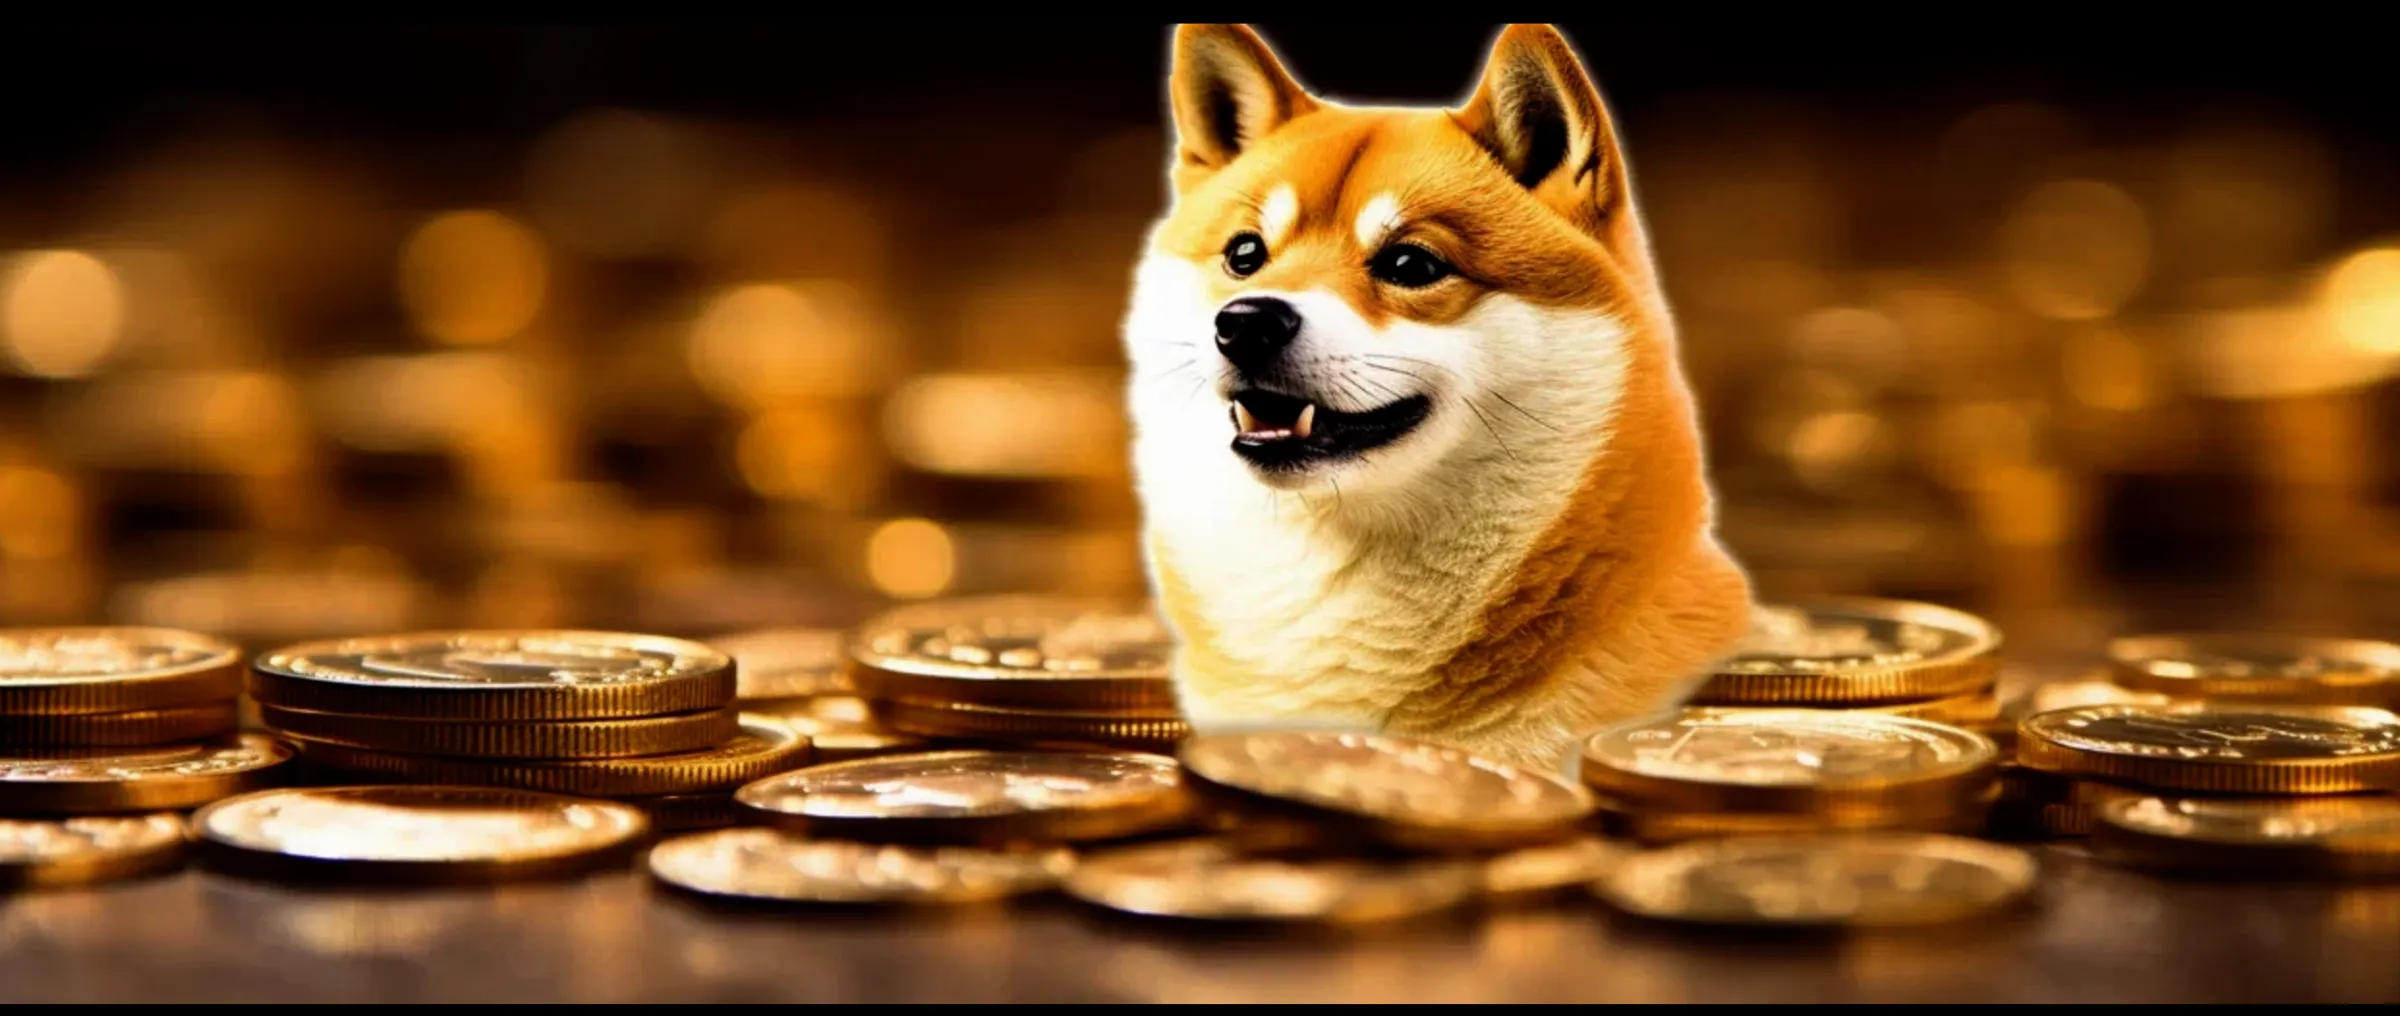 The price of SHIB has increased by 80% in the last 24 hours